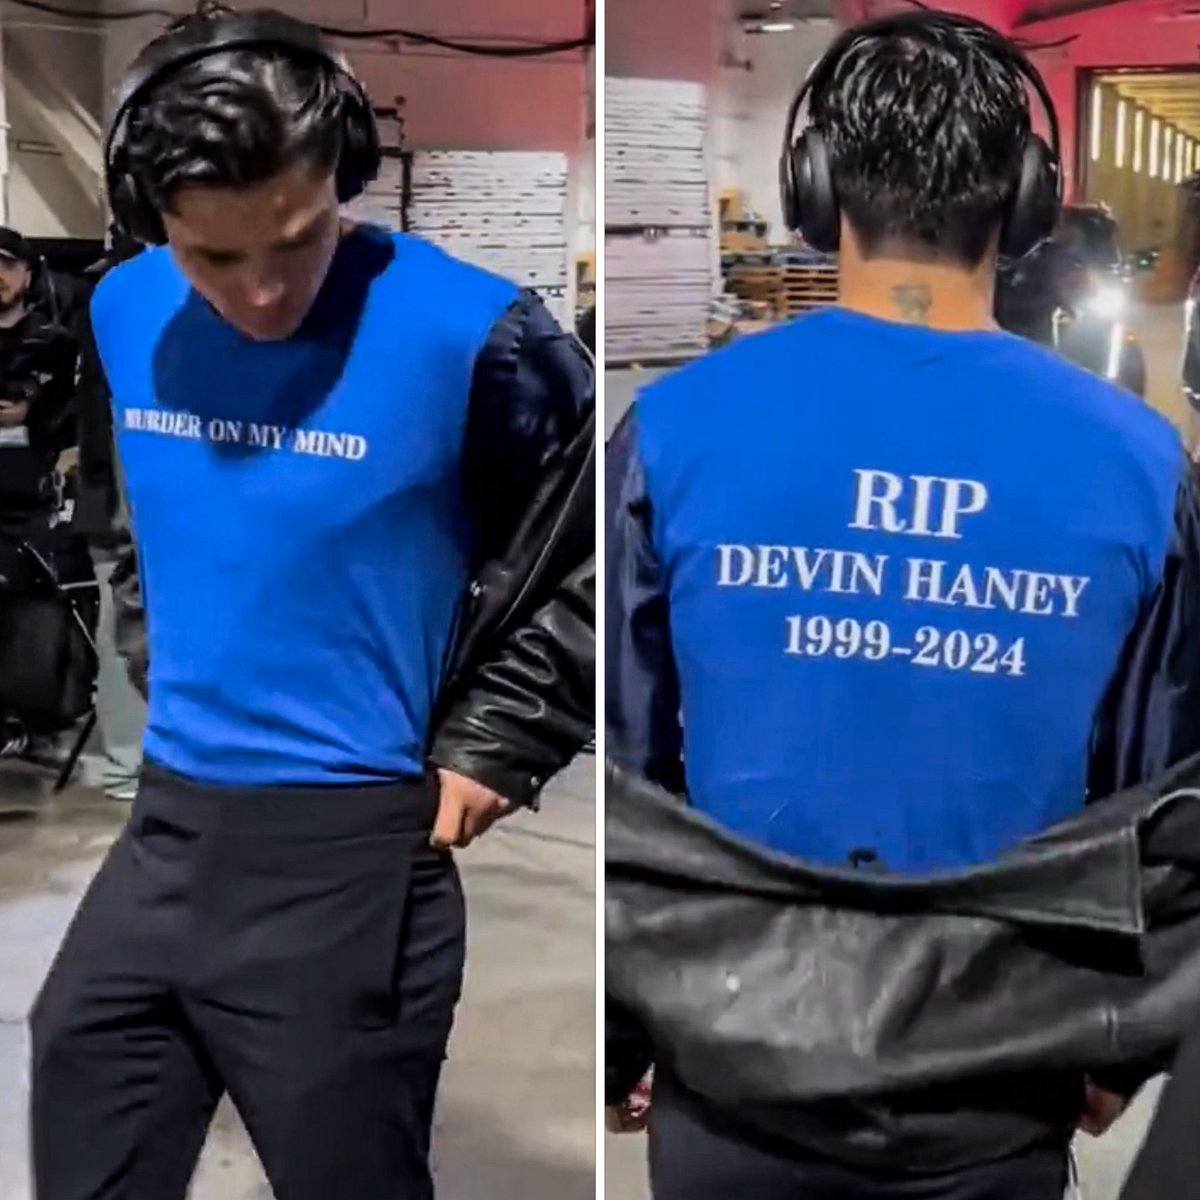 Ryan Garcia pulled up to the arena with a ‘RIP Devin Haney’ shirt 🥶